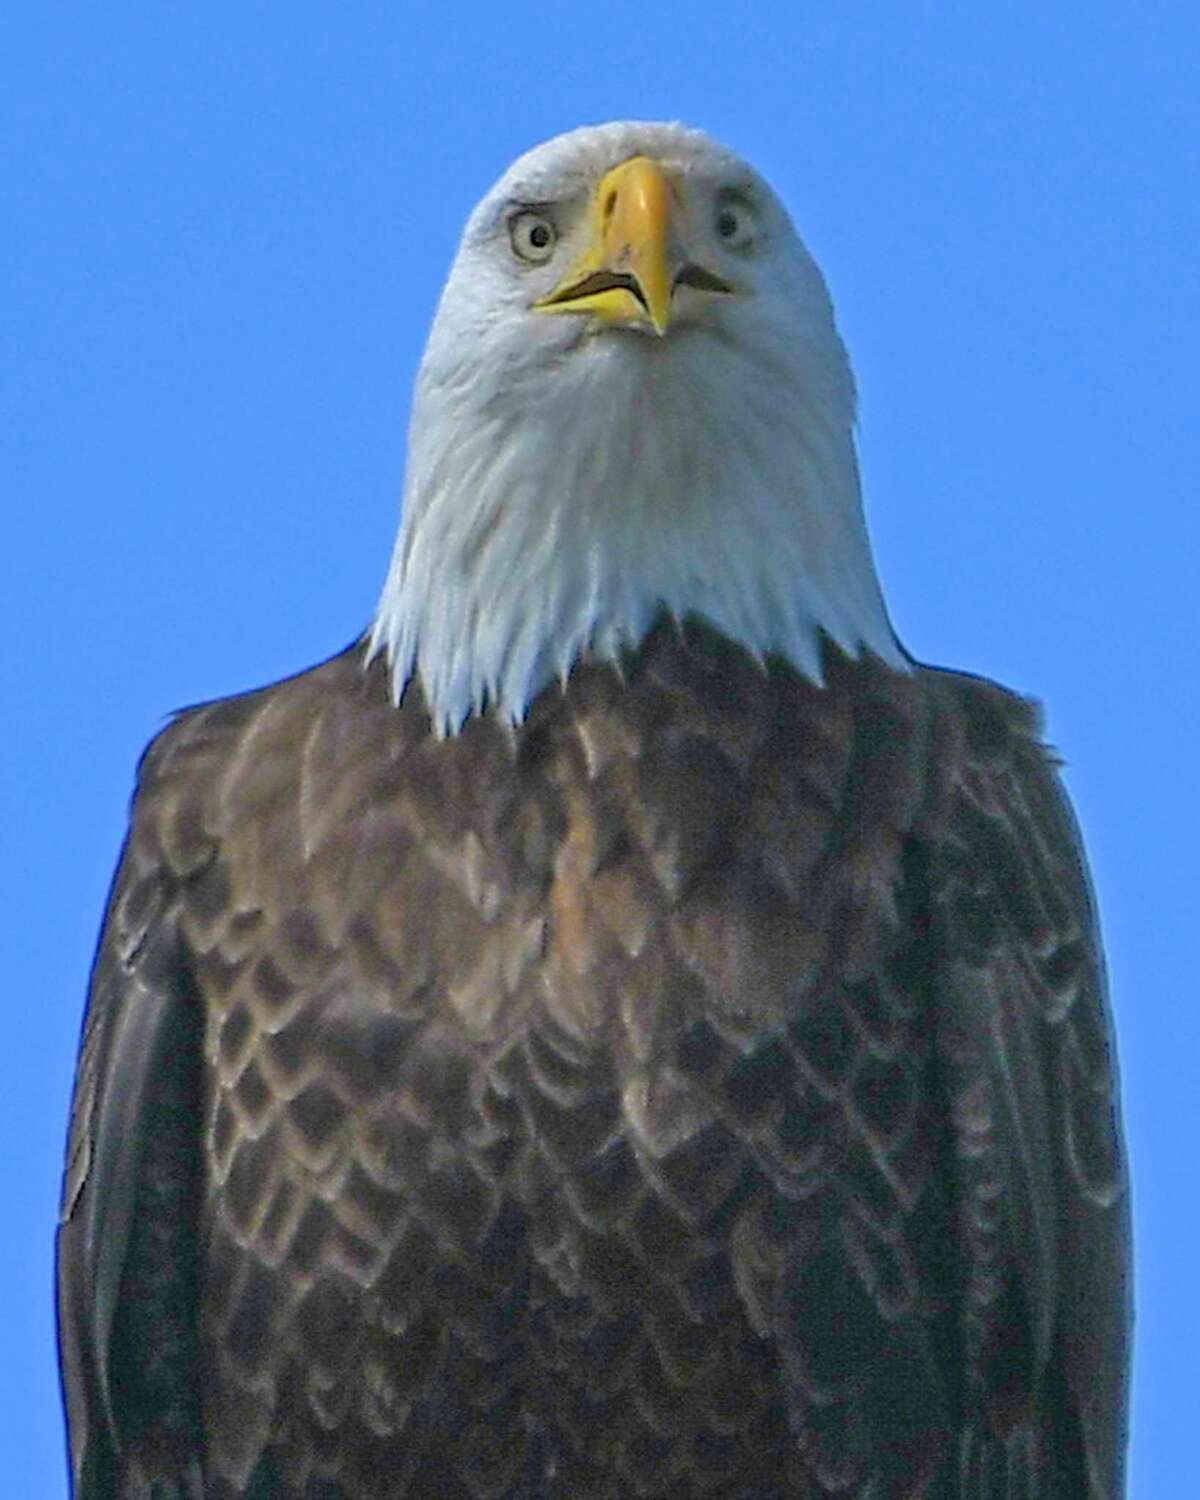 Joyce Bassett captured this view of an eagle near its nest on an otherwise empty golf course along the Mohawk River in Saratoga County on Thursday, April 16, 2020.